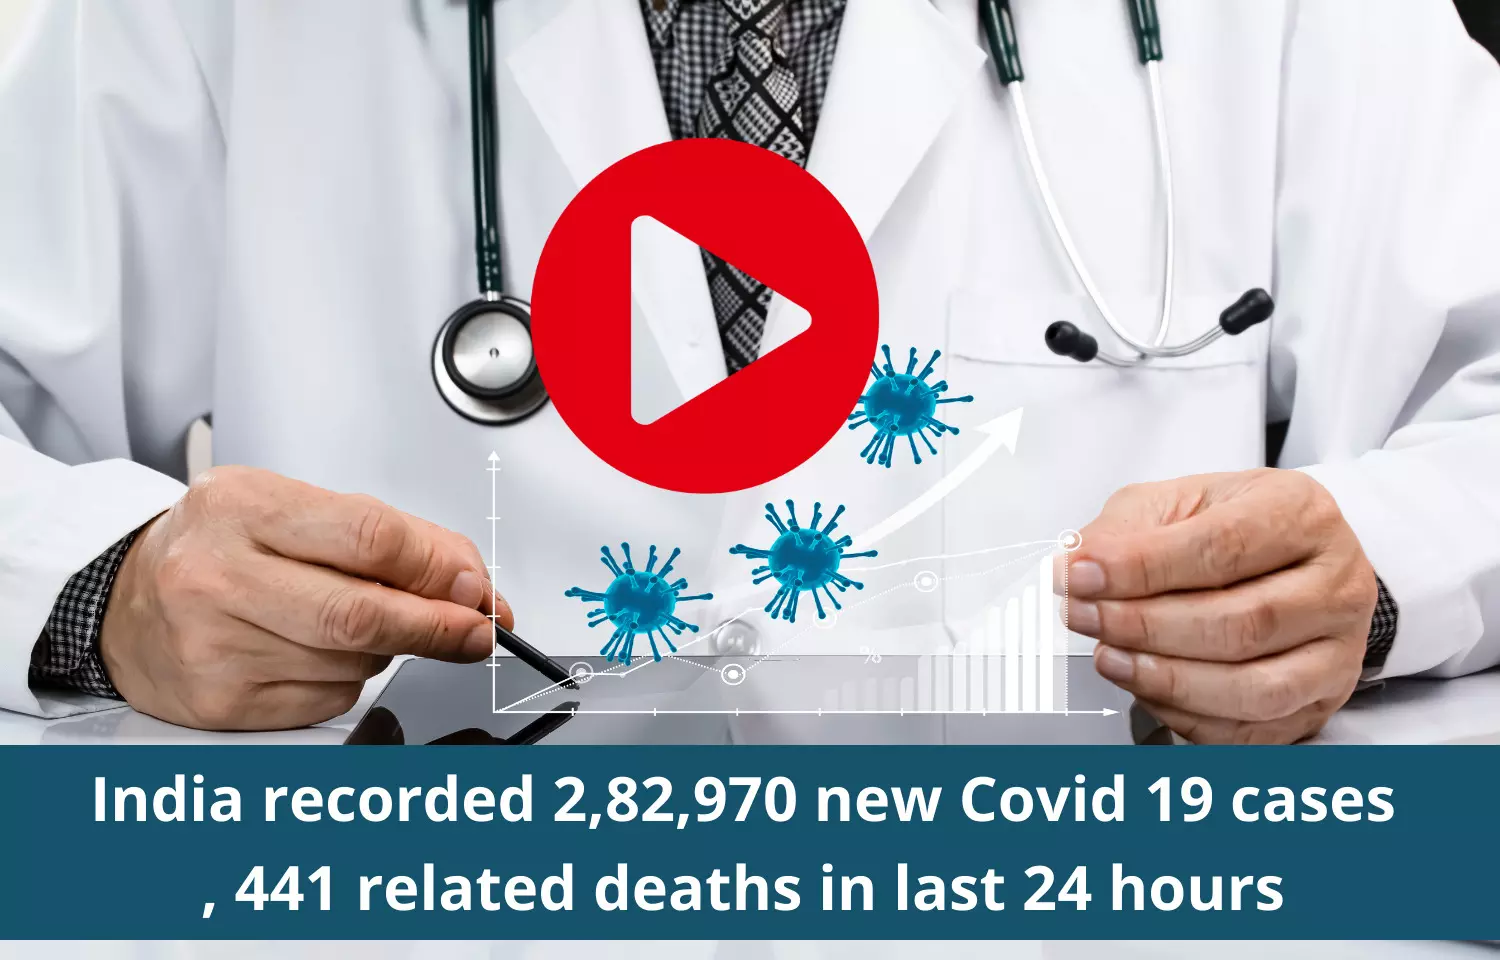 India recorded 2,82,970 new Covid 19 cases, 441 related deaths in last 24 hours